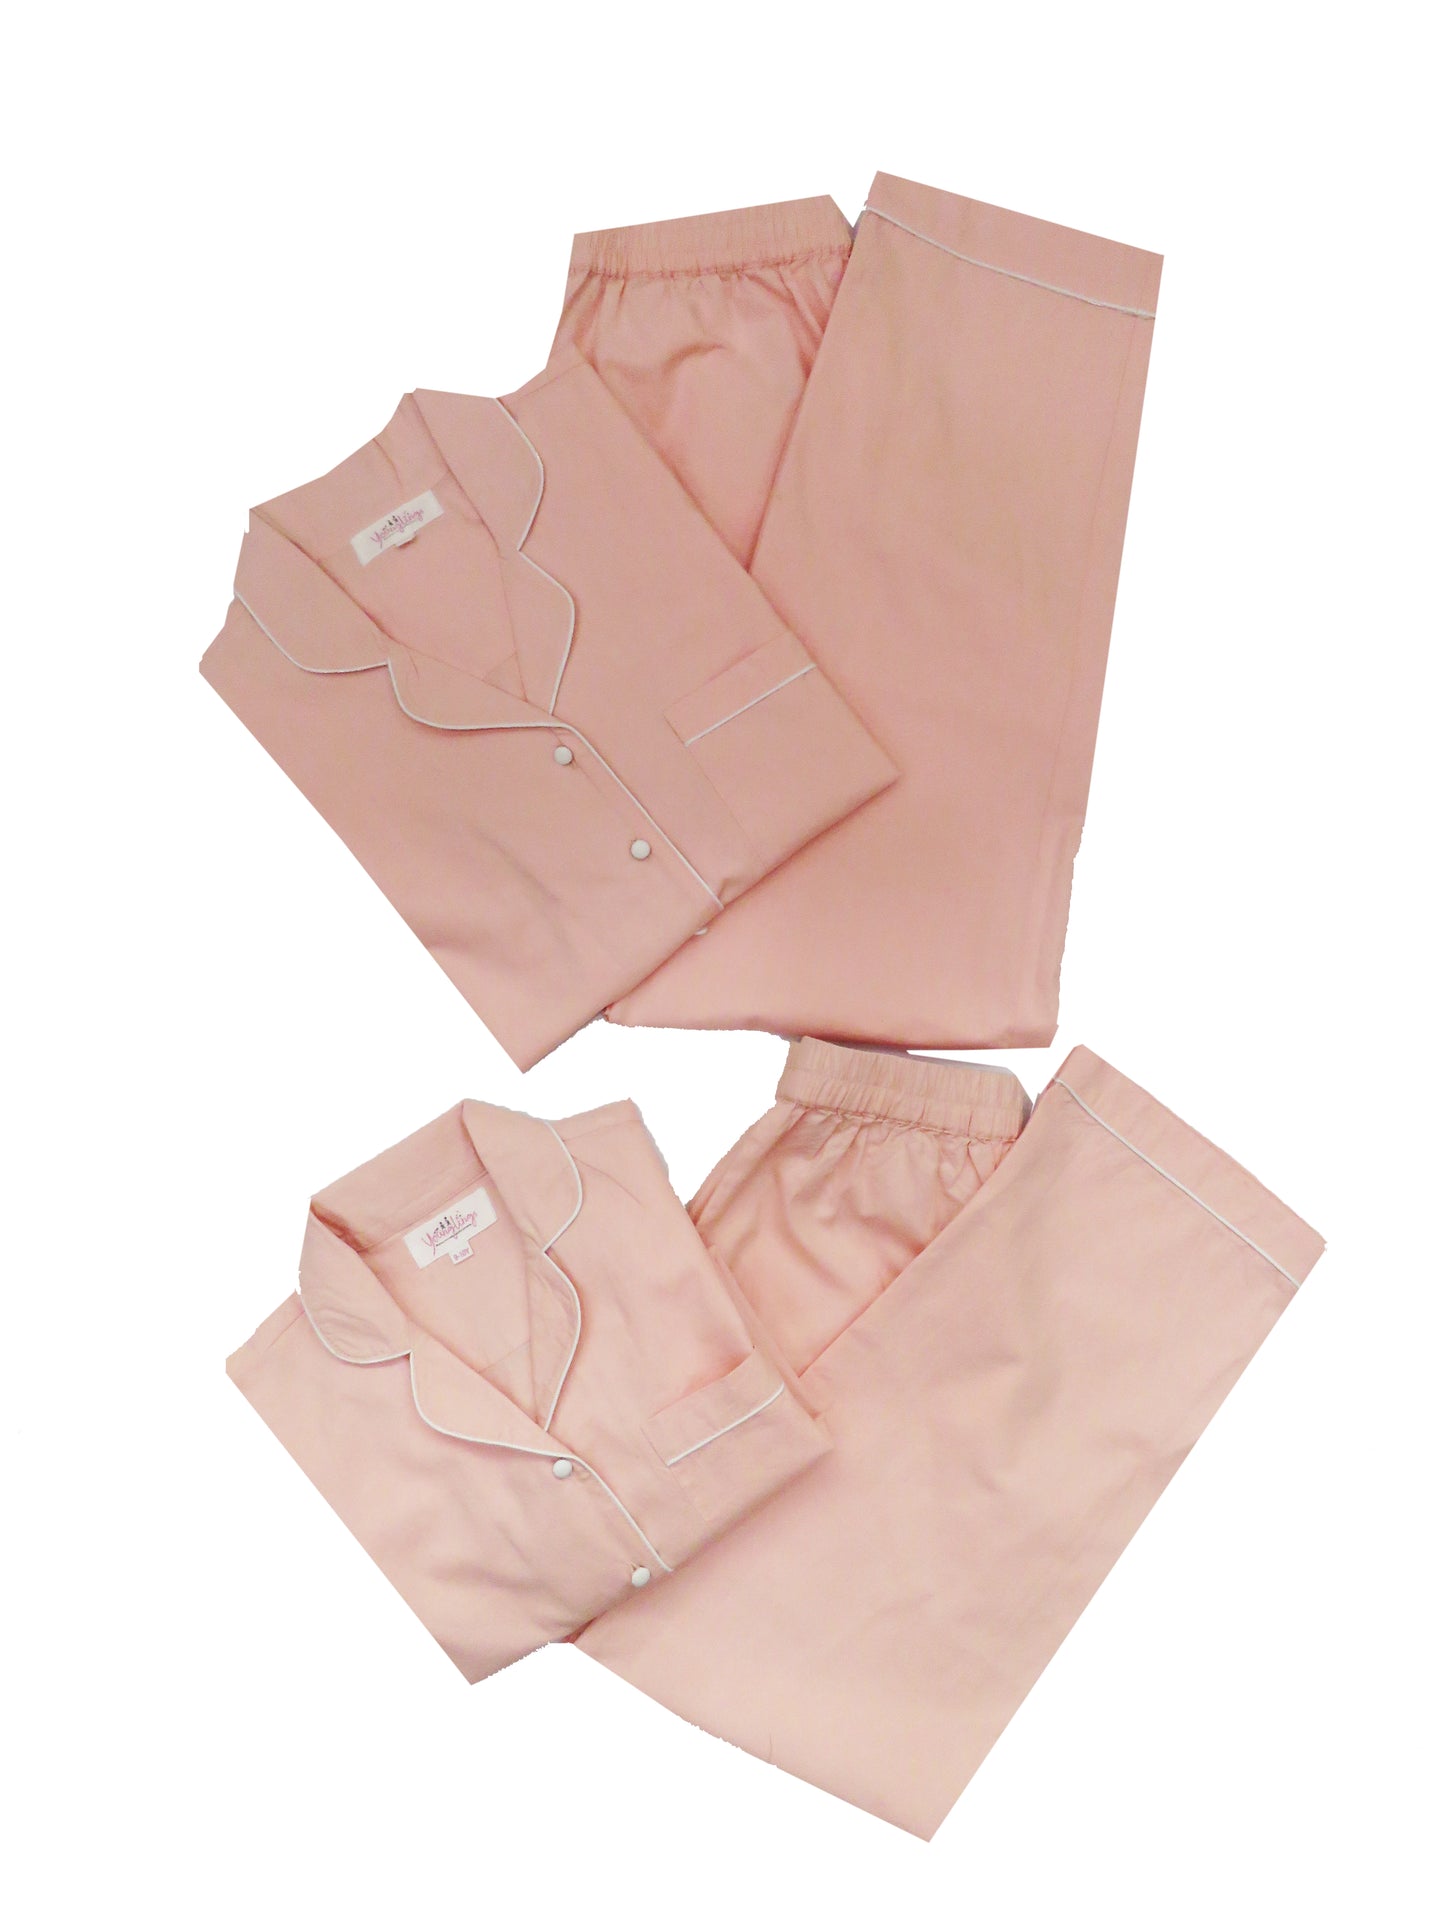 FULL SLEEVES PRETTY IN PEACH TWINNING NIGHTSUIT SET  WITH WHITE BUTTONS AND PIPING